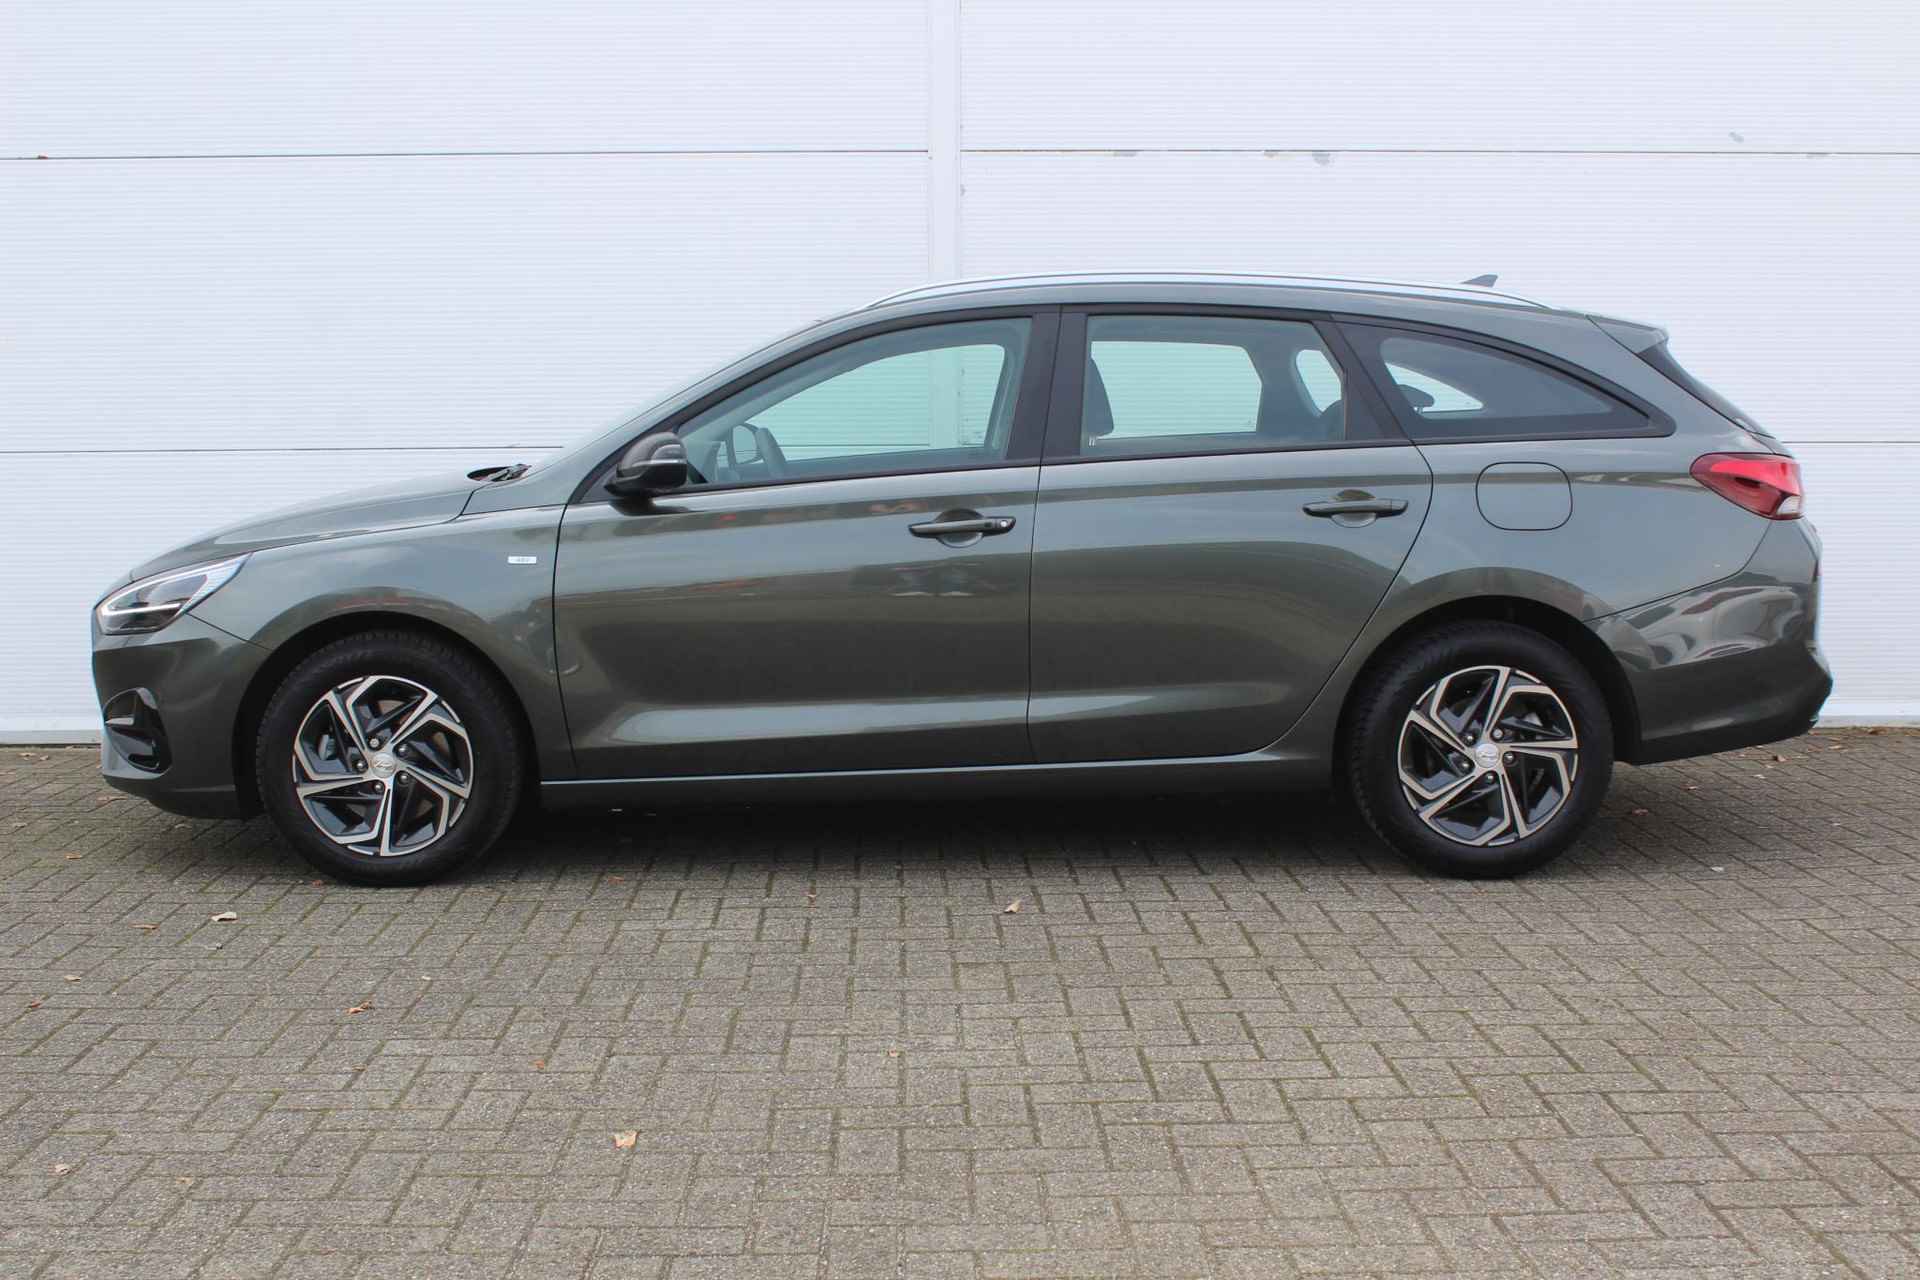 Hyundai i30 Wagon 1.0 T-GDi MHEV Comfort Smart AUTOMAAT / Navigatie + Apple Carplay/Android Auto / Cruise Control / Achteruitrijcamera / Climate Control / Keyless Entry & Start / - 9/43